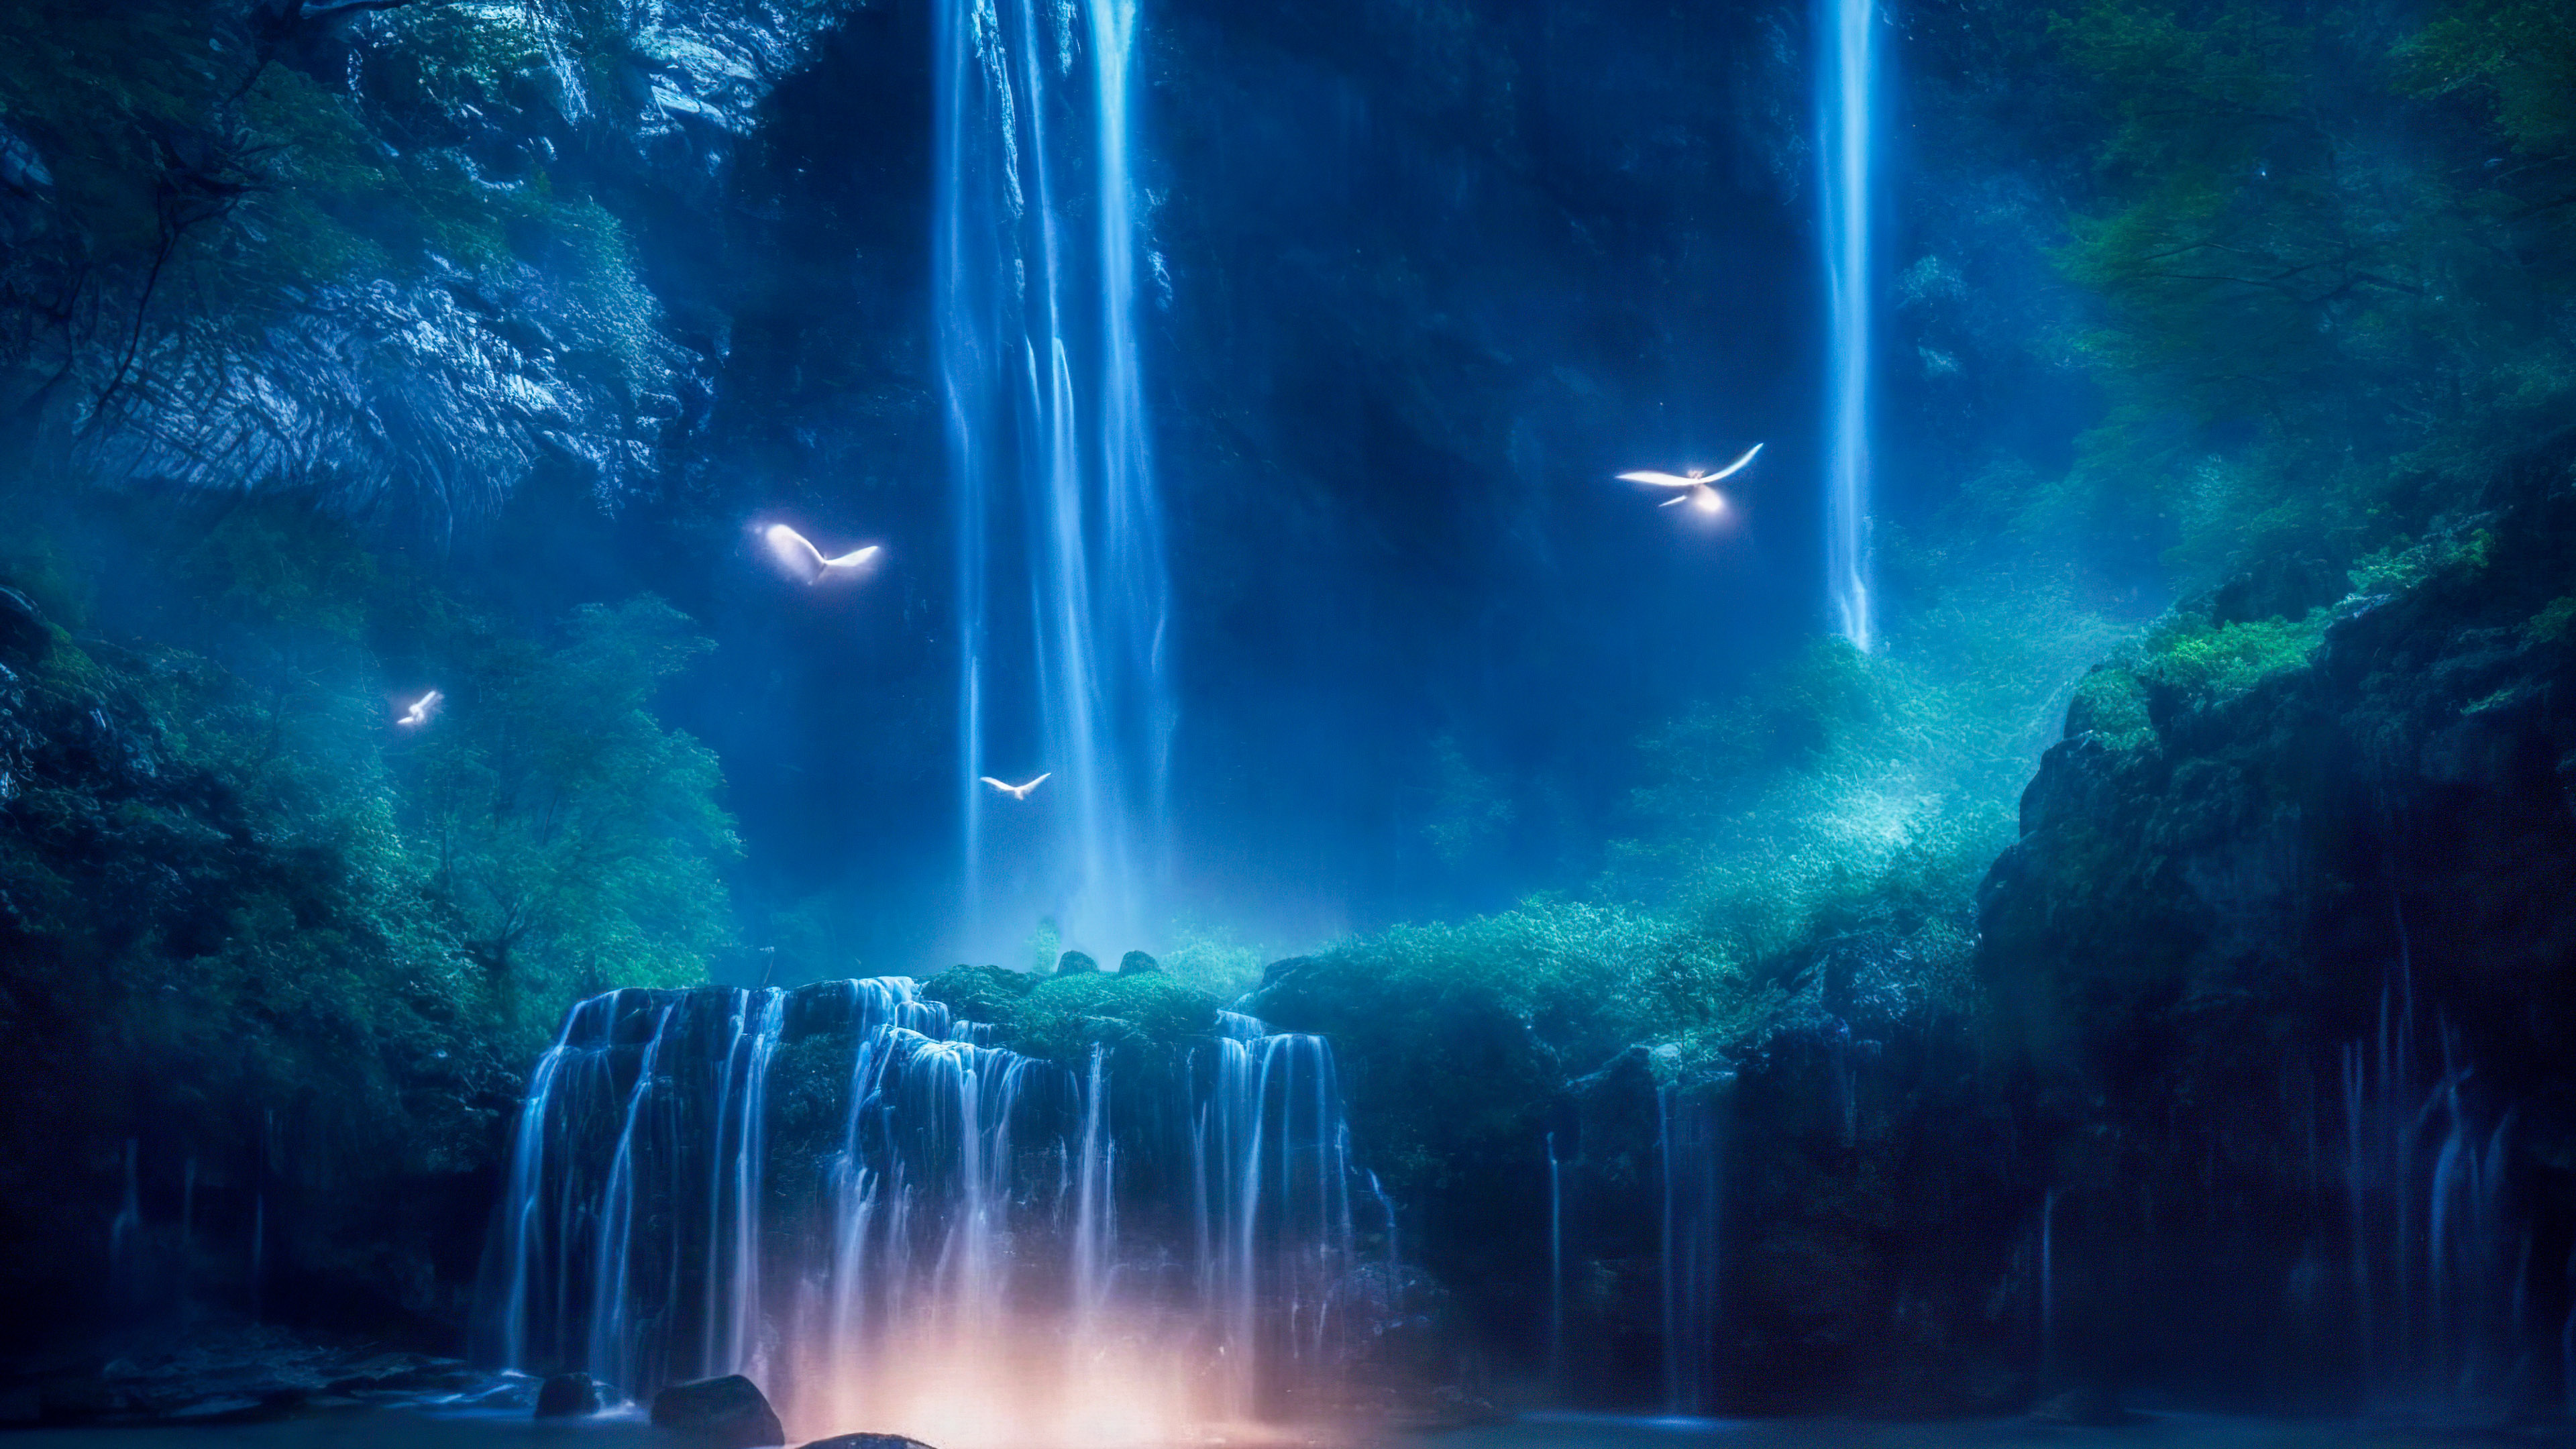 Experience the enchantment of a magical waterfall illuminated by moonlight, with fireflies dancing around its cascading waters, through our nature wallpaper in 4K for your PC.